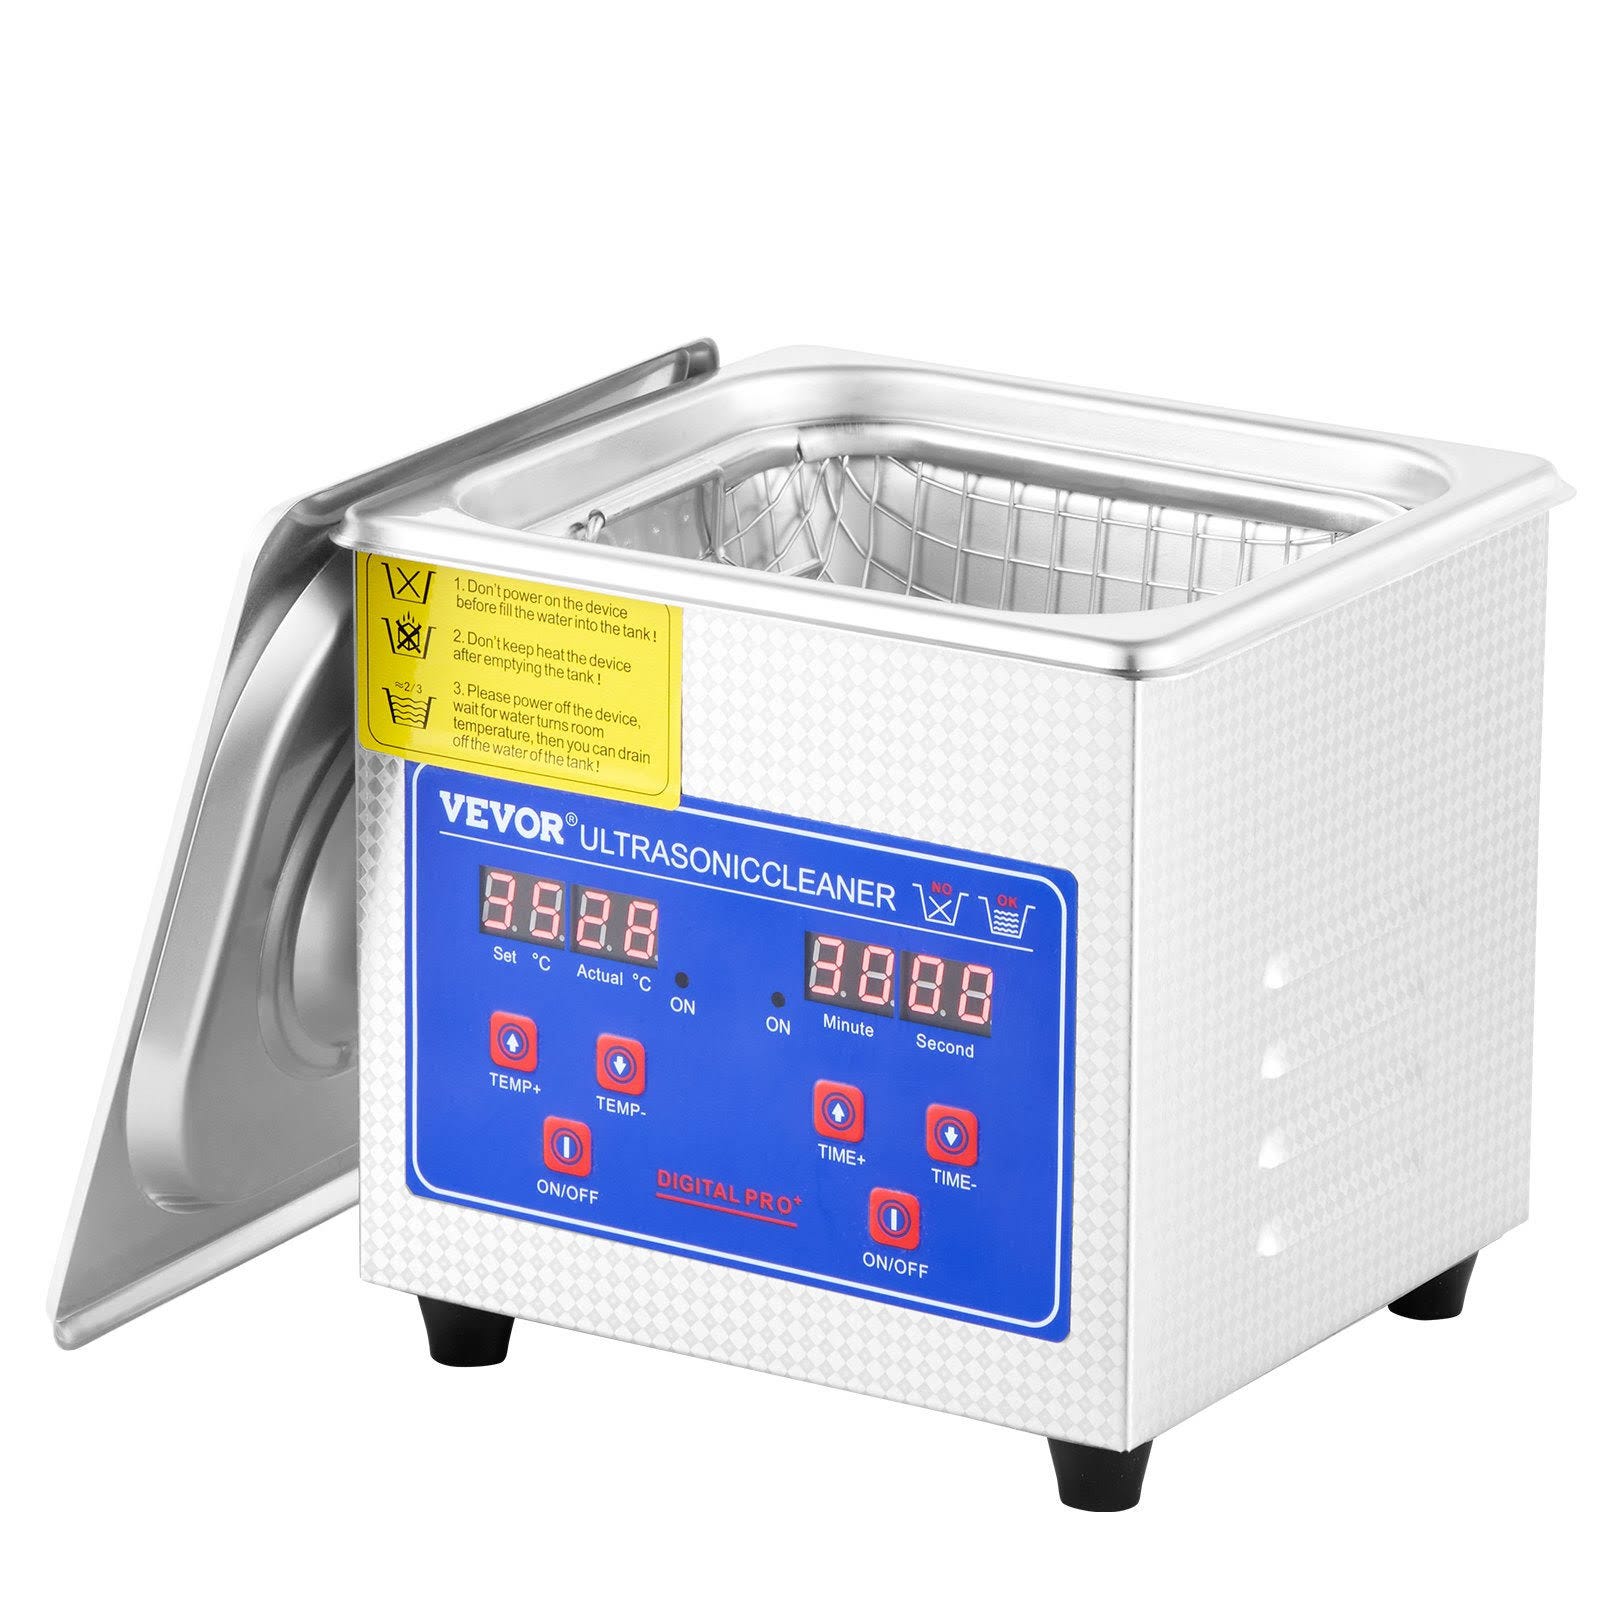 Vevor Advanced Stainless Steel Ultrasonic Cleaner for Jewelry and Glasses | Image